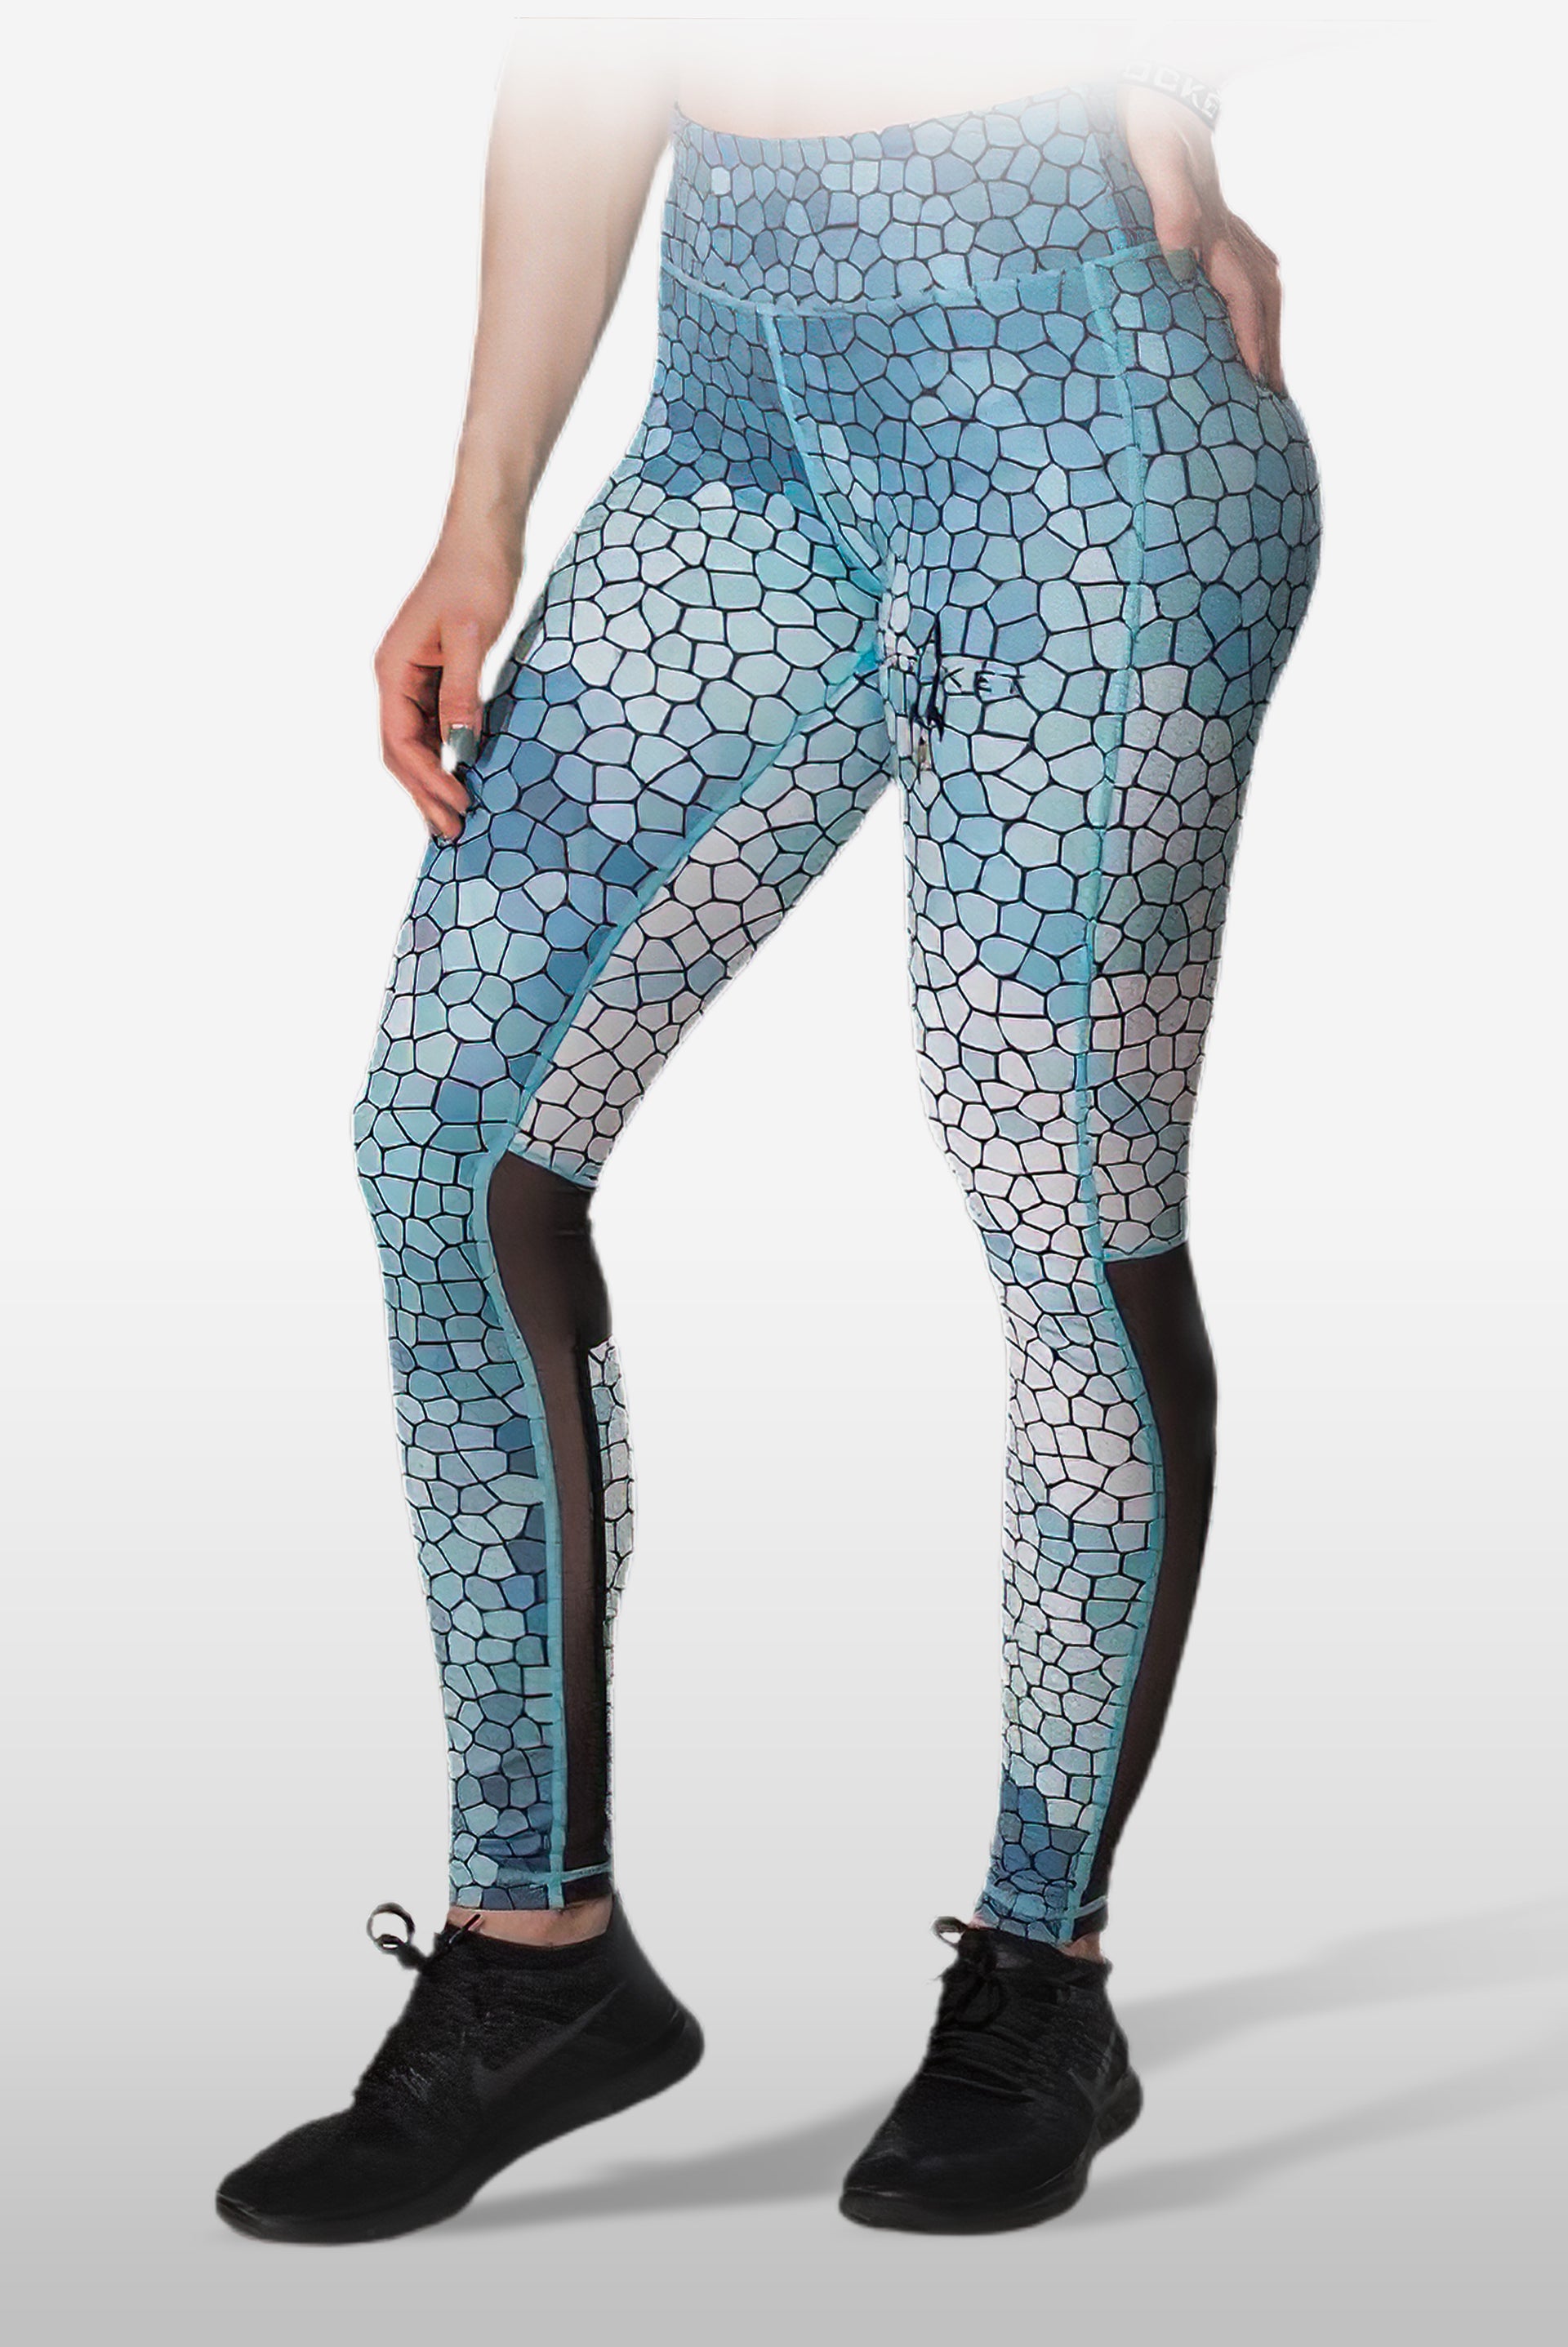 Sports and Leisure :: Sports material and equipment :: Leggings